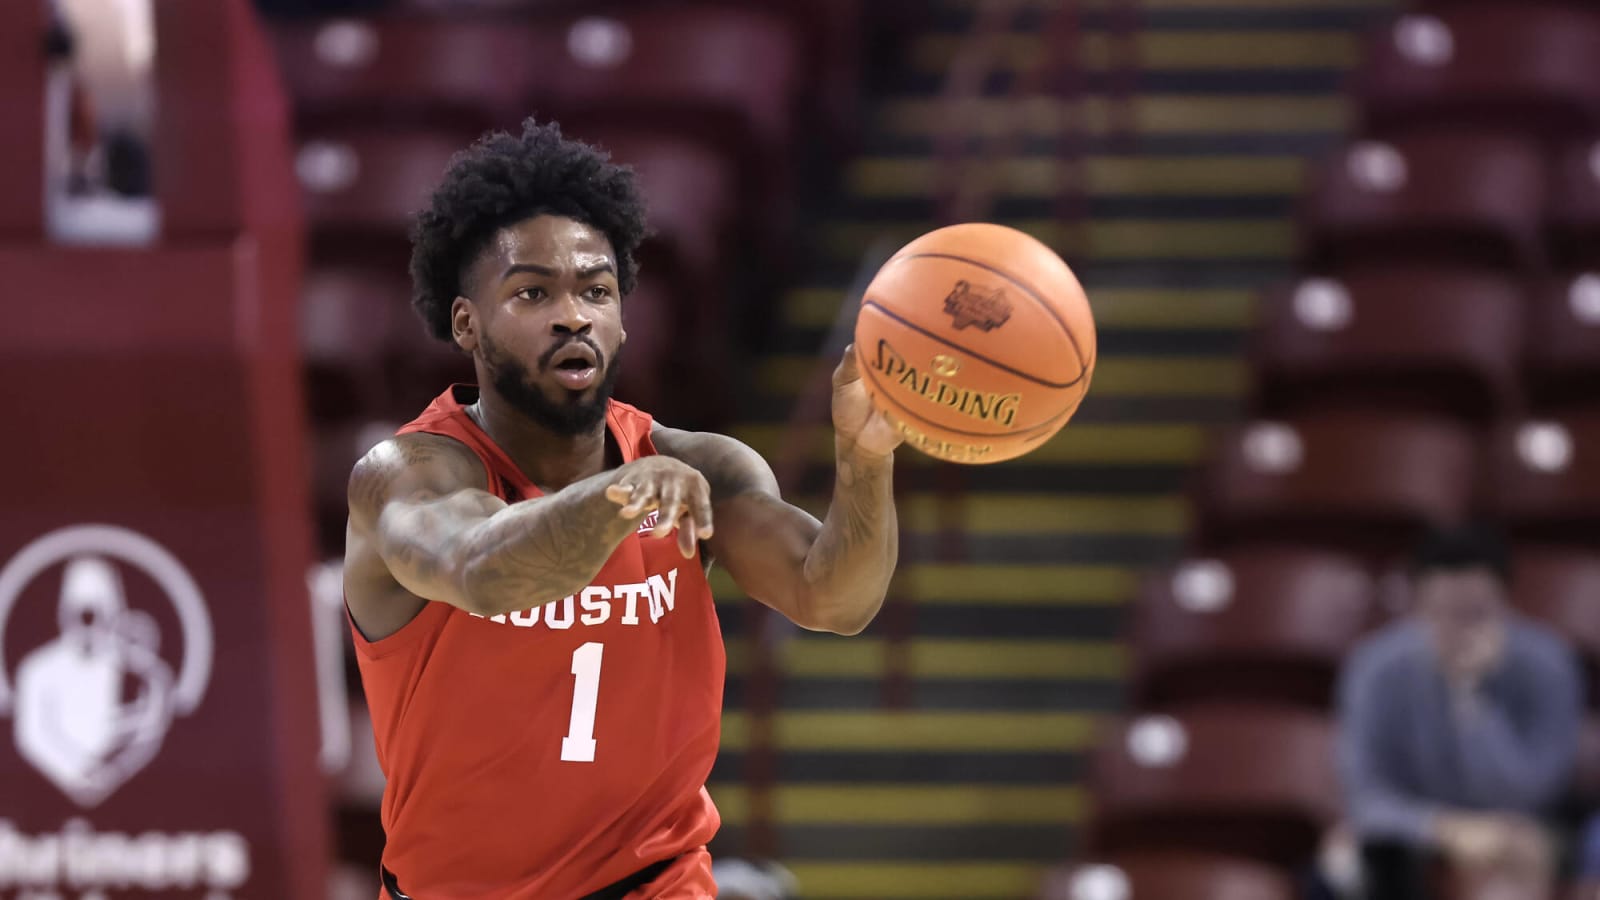 NCAAB futures: These teams are longer shots, but worth keeping an eye on